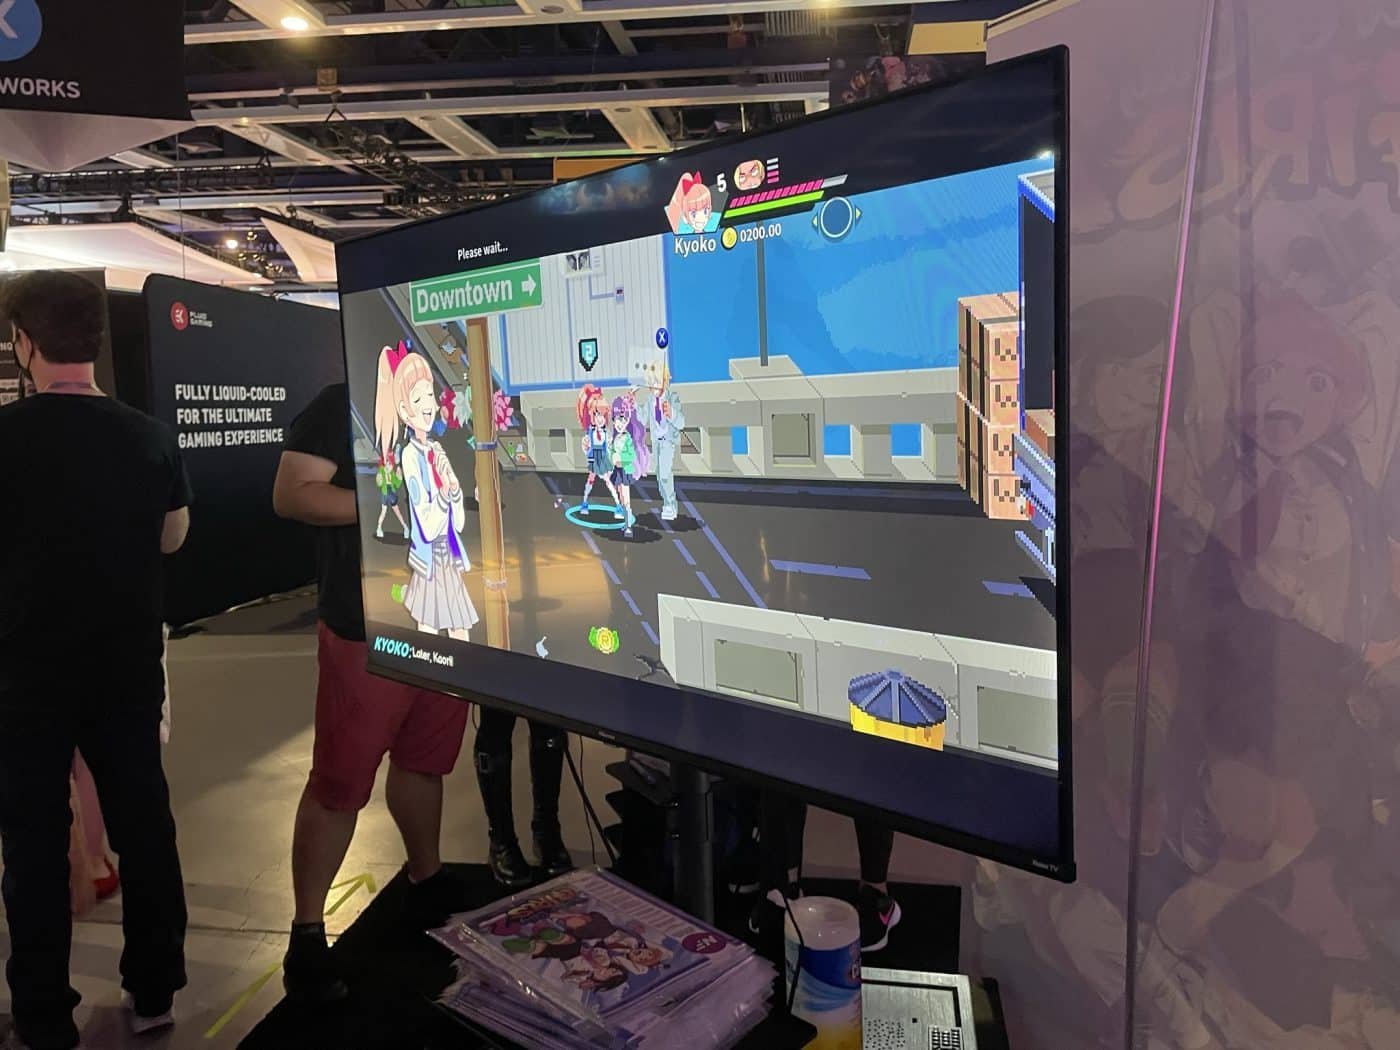 Rivery city girls 2 being demoed at pax west 2022